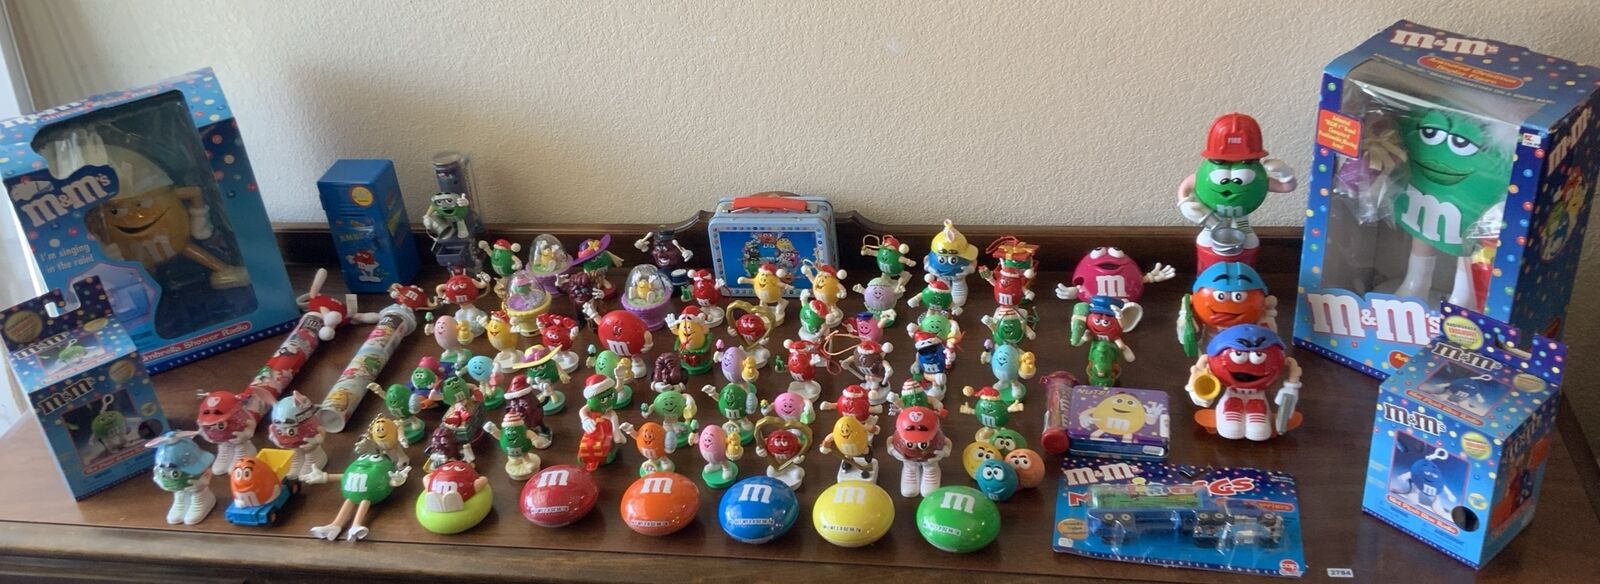 HUGE LOT OF M&M’s COLLECTIBLES FIGURES CANDY DISPENSER TOPPER RADIO TIN BANK TOY